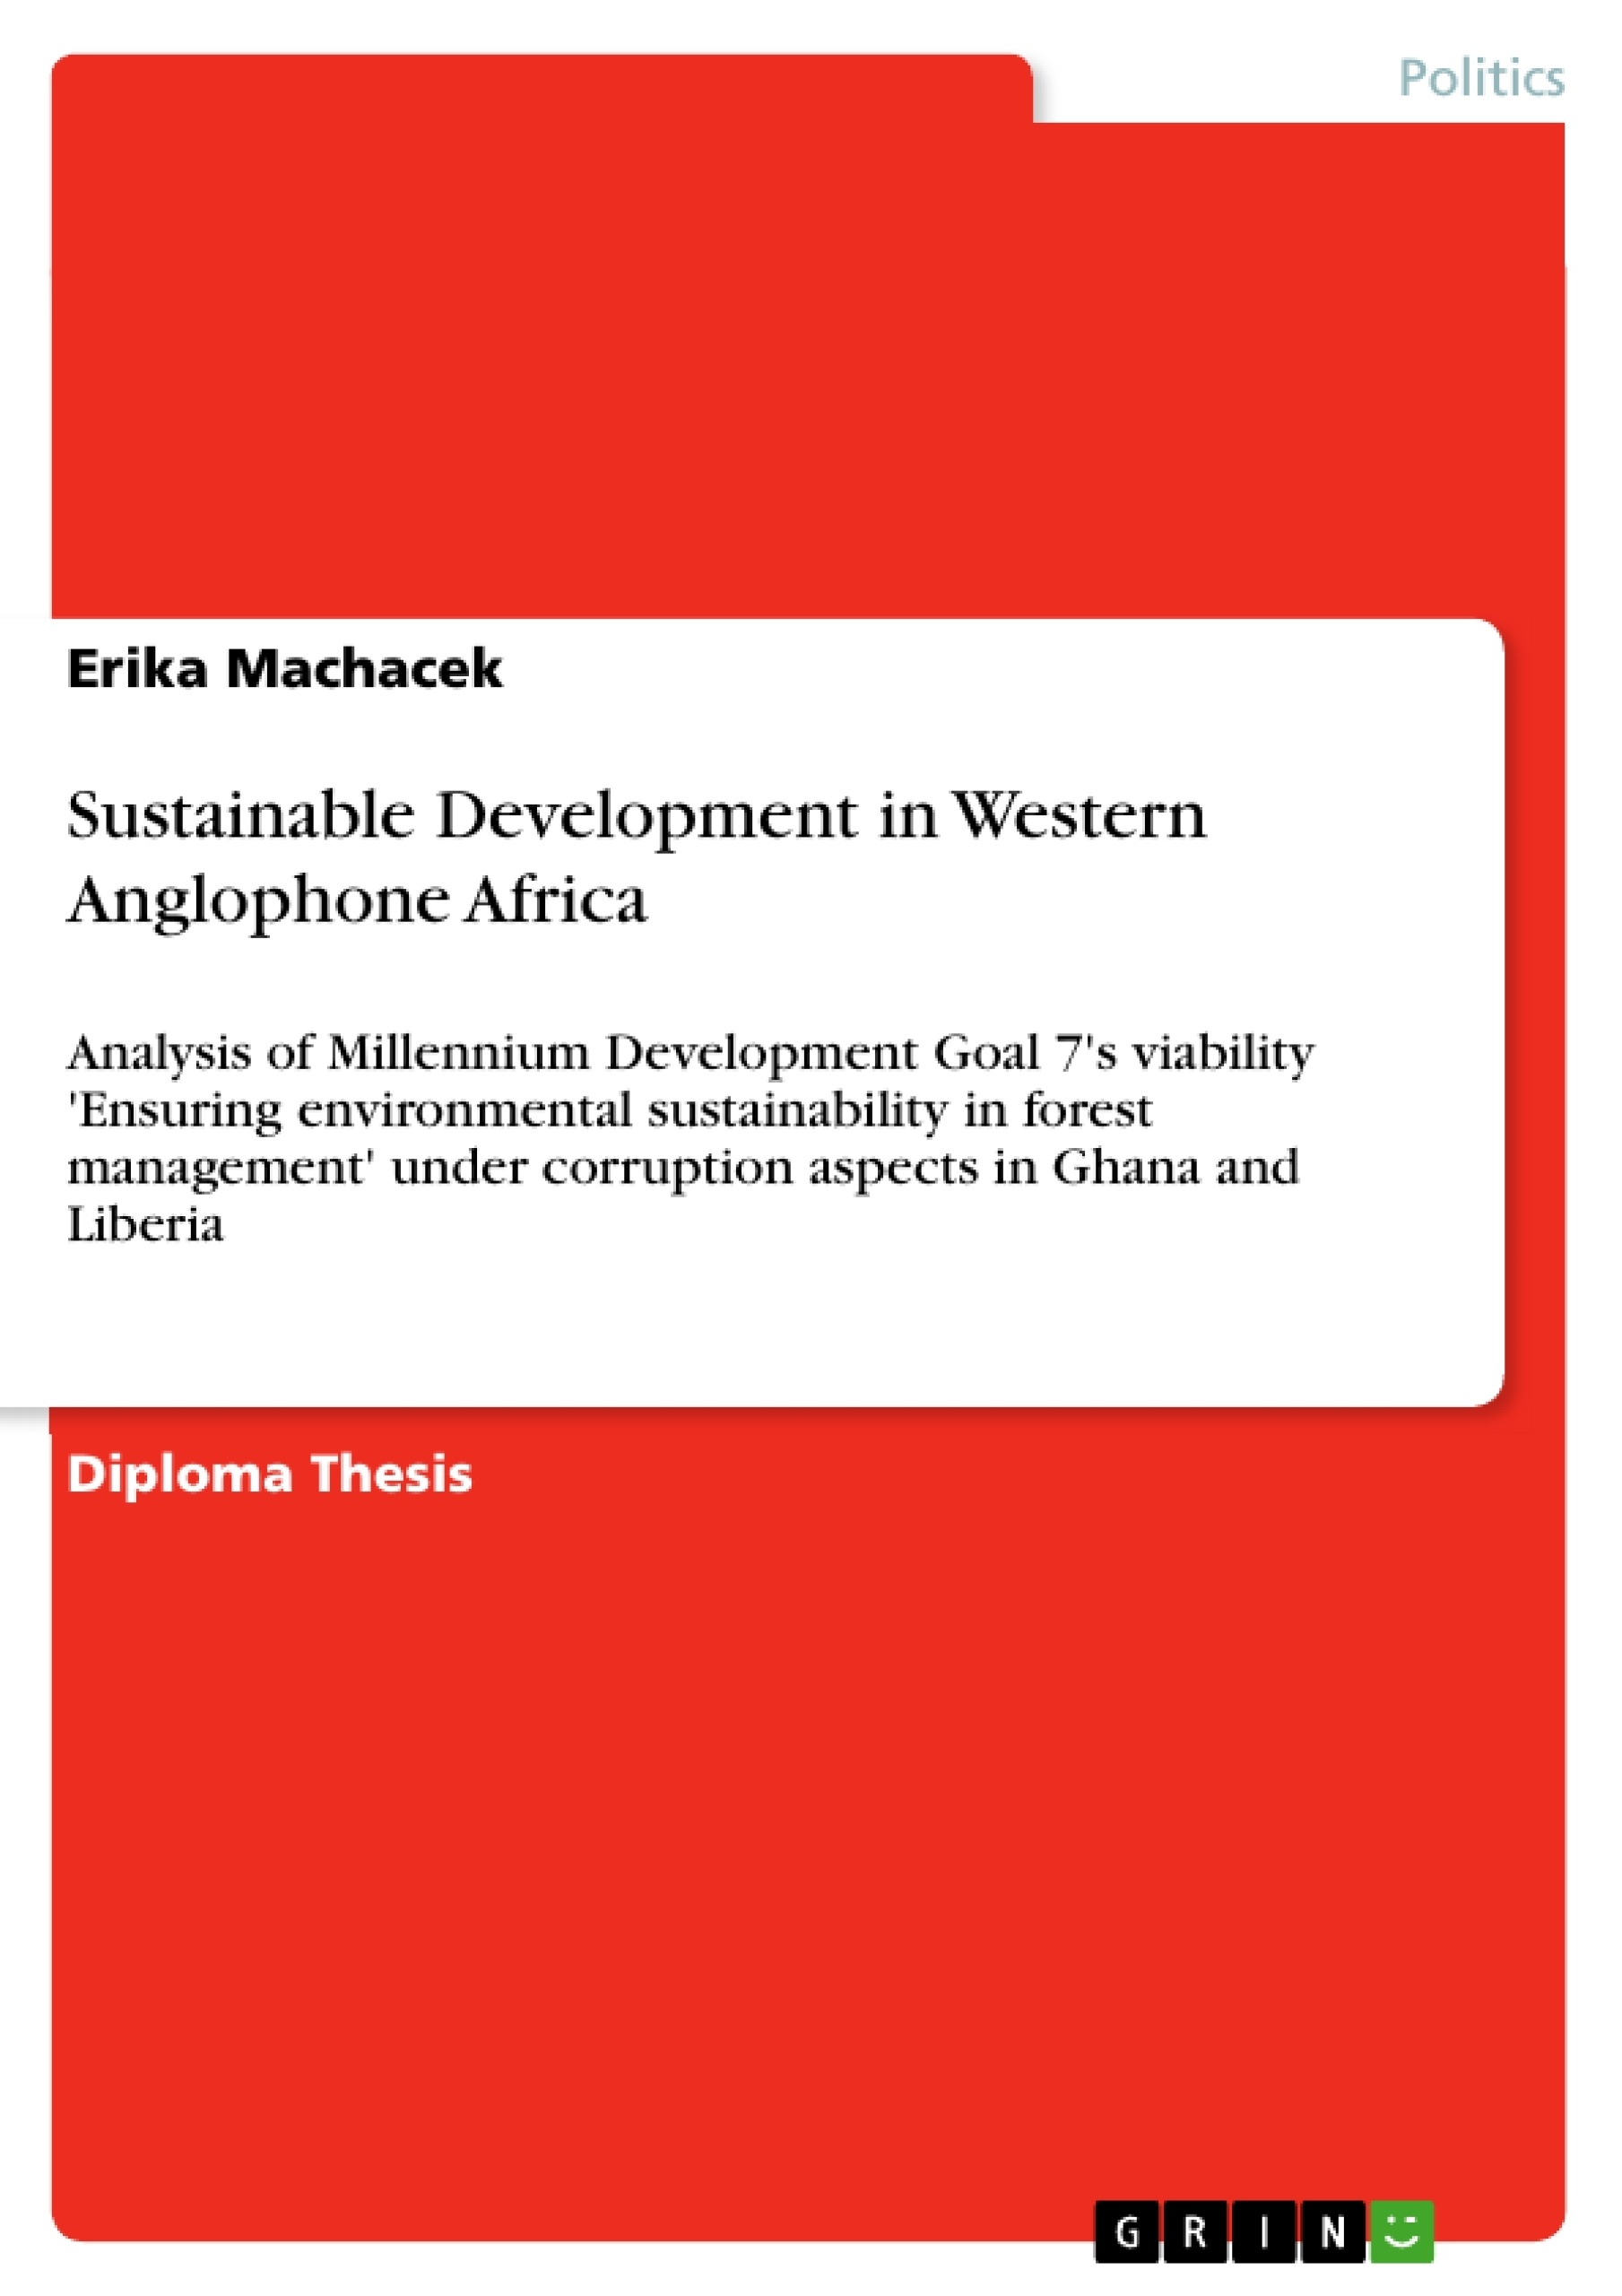 Title: Sustainable Development in Western Anglophone Africa